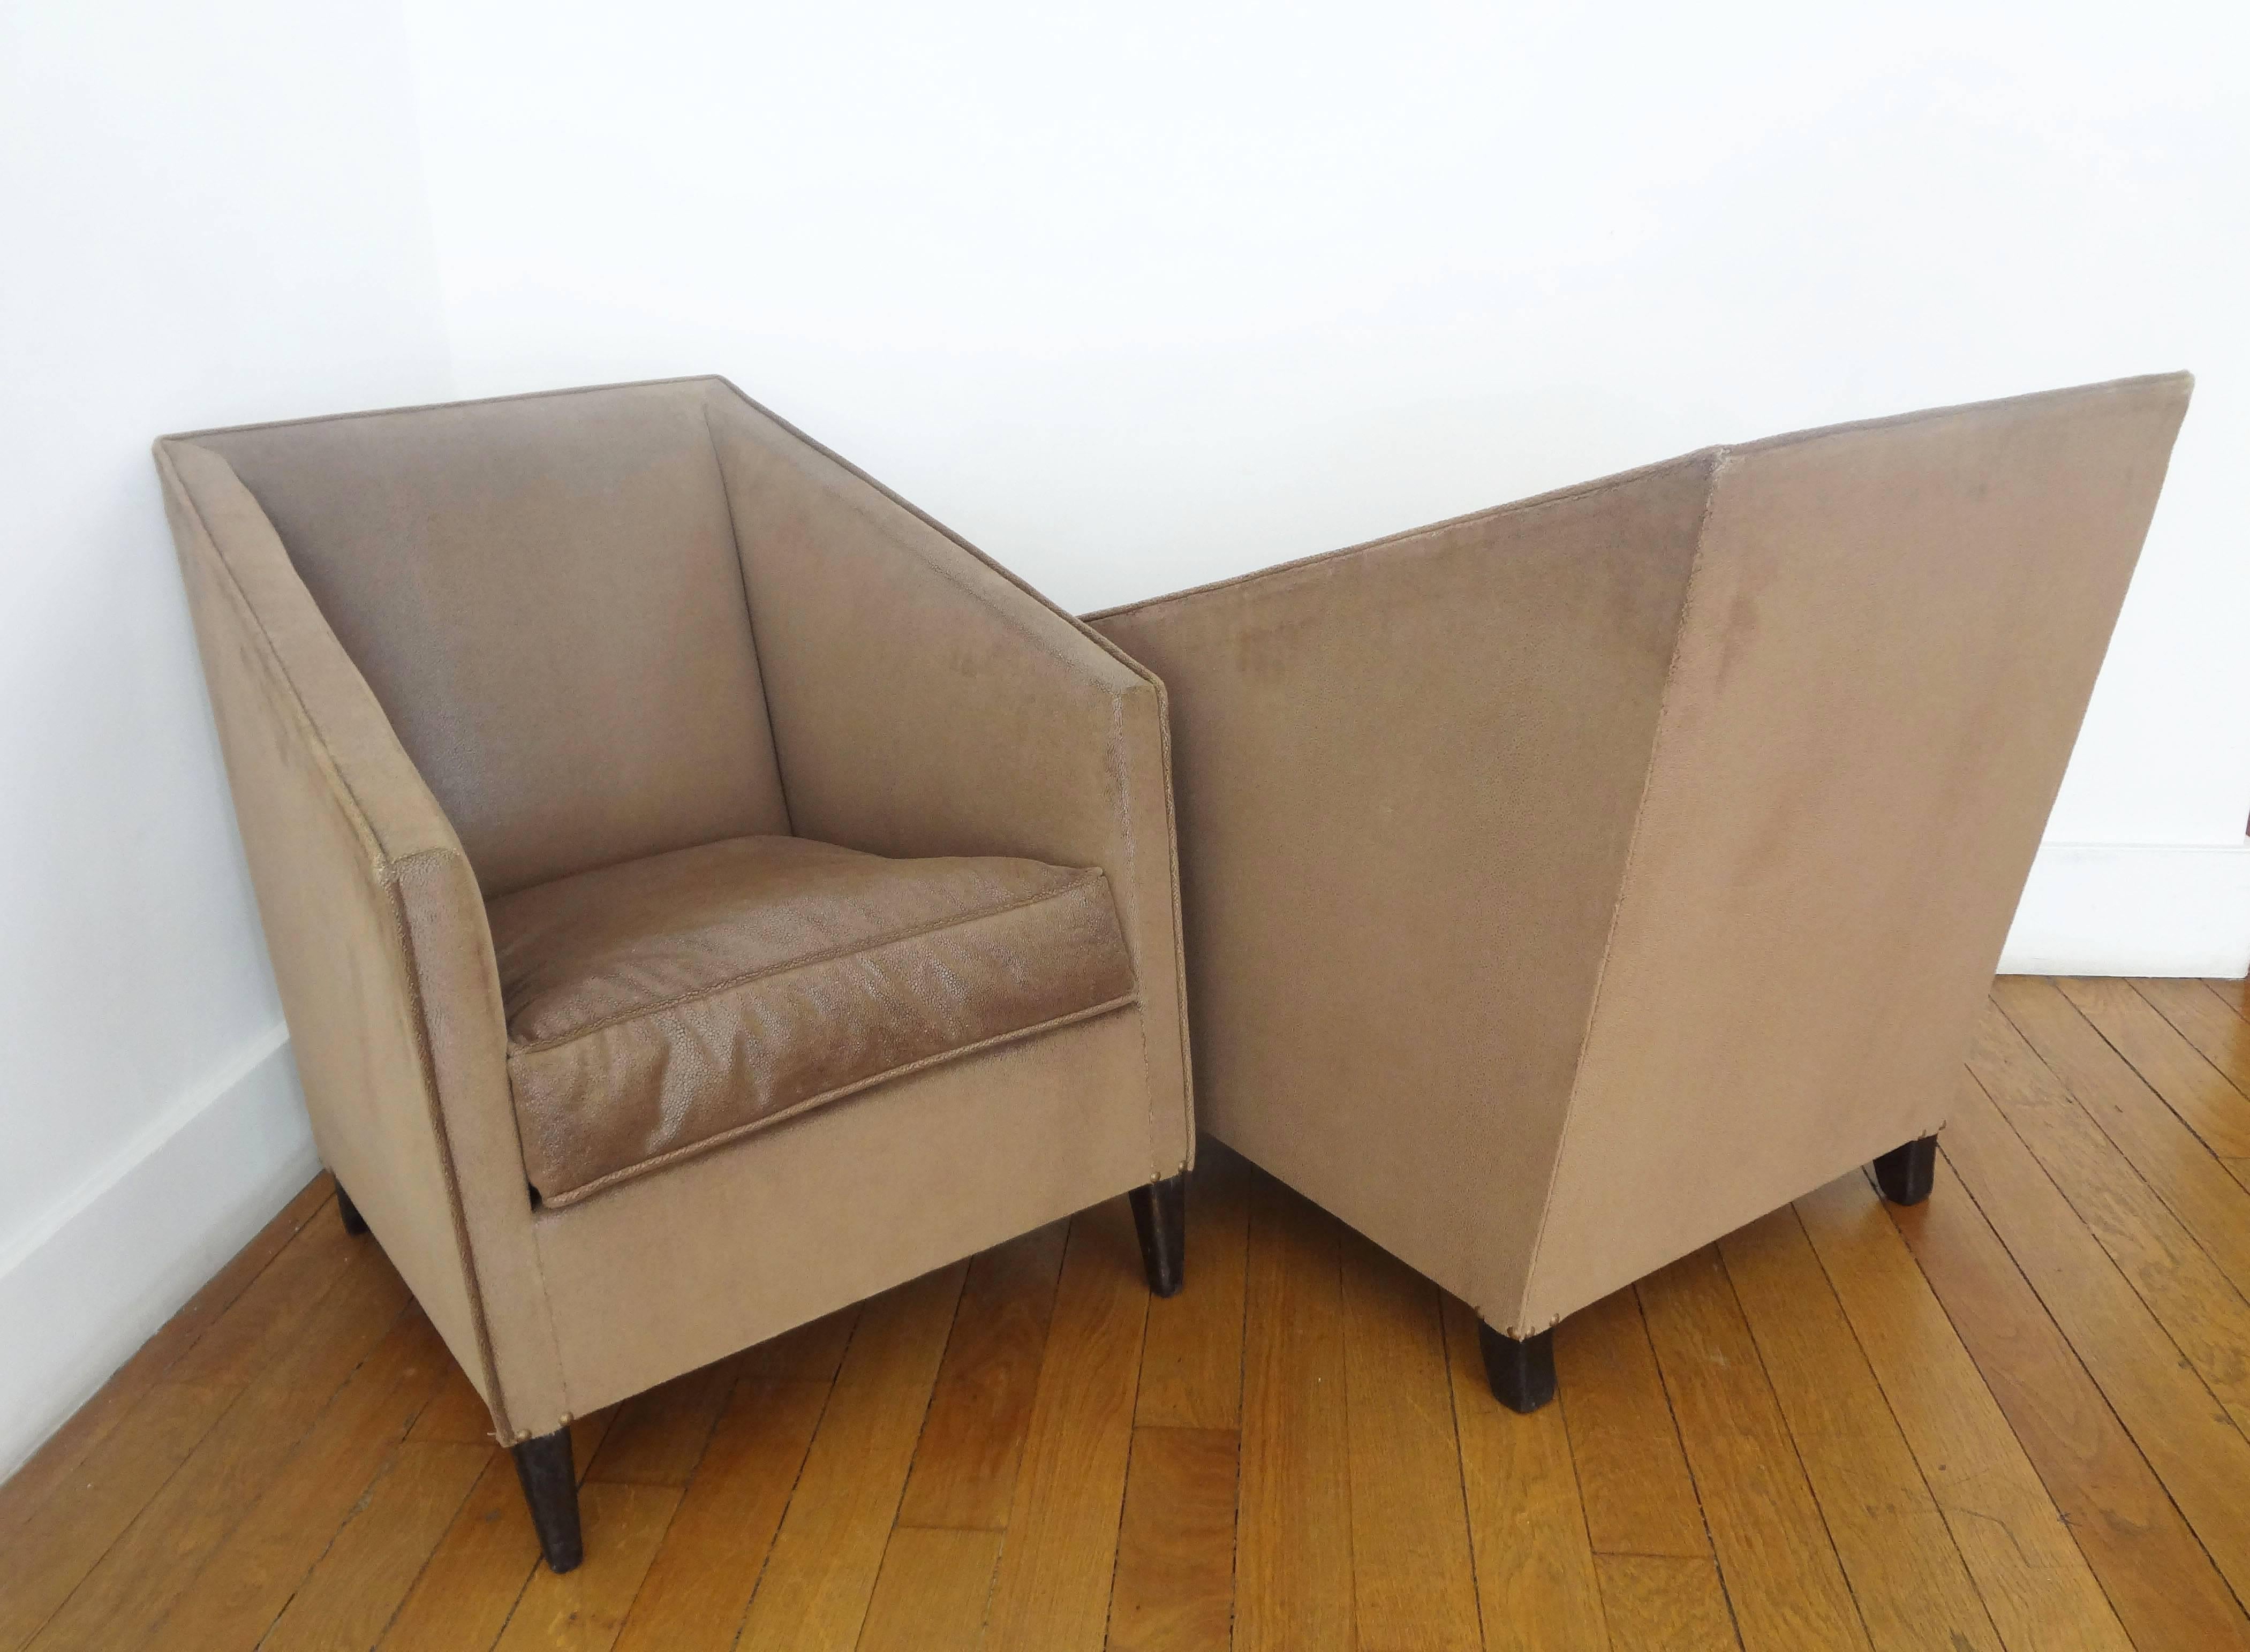 Patinated Pair of Modernist Armchairs, 1920s, by Francis Jourdain For Sale